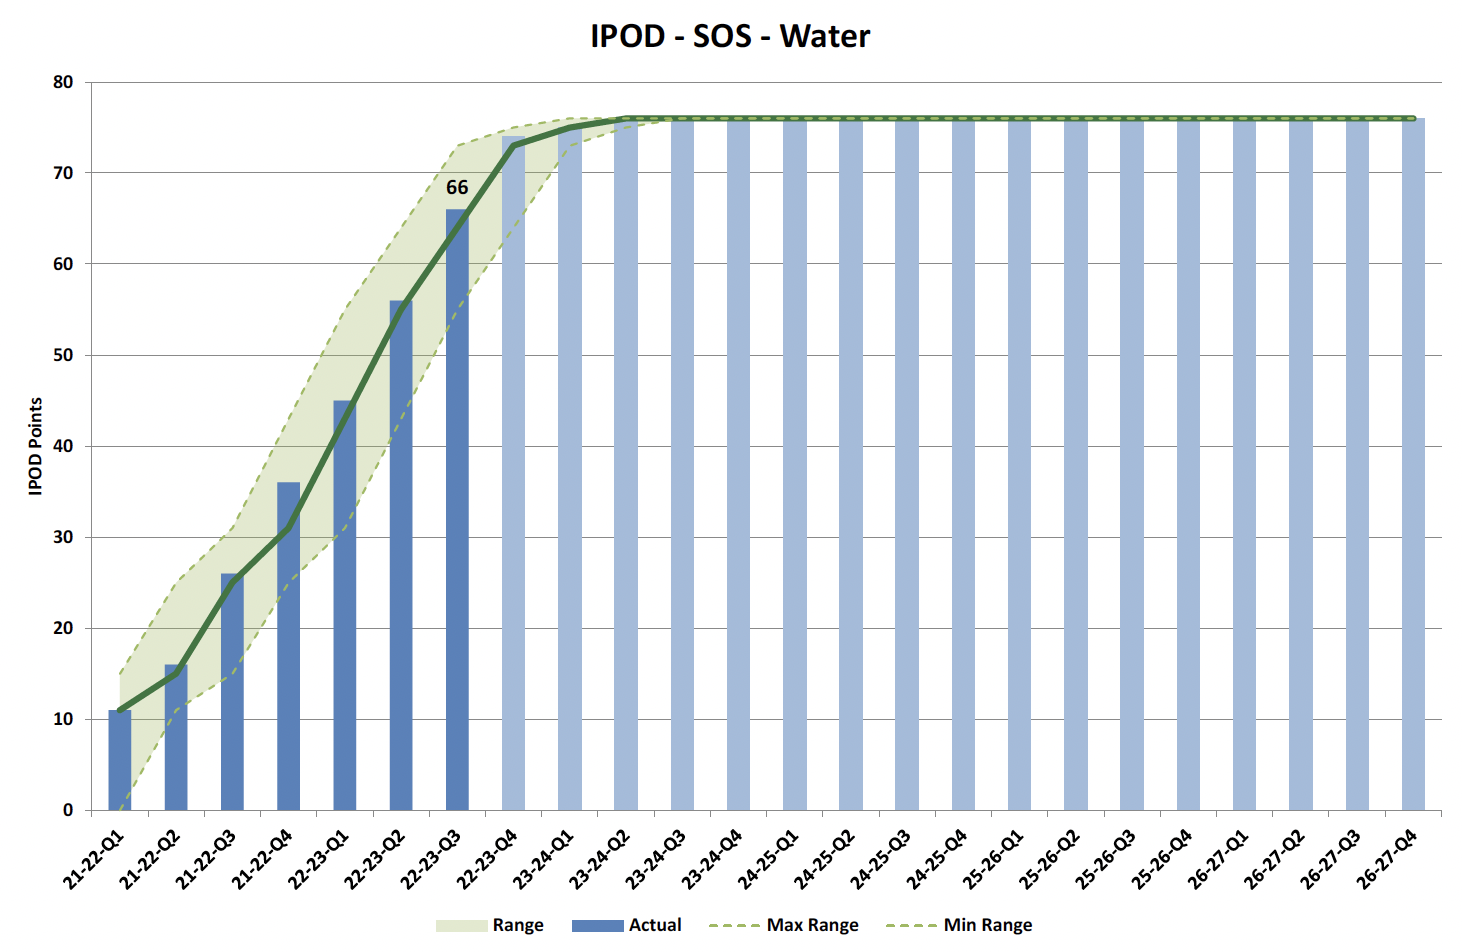  Figure 6 Chart showing IPOD points achieved or forecast for Start on Site milestone against target range for all projects in Water Portfolio